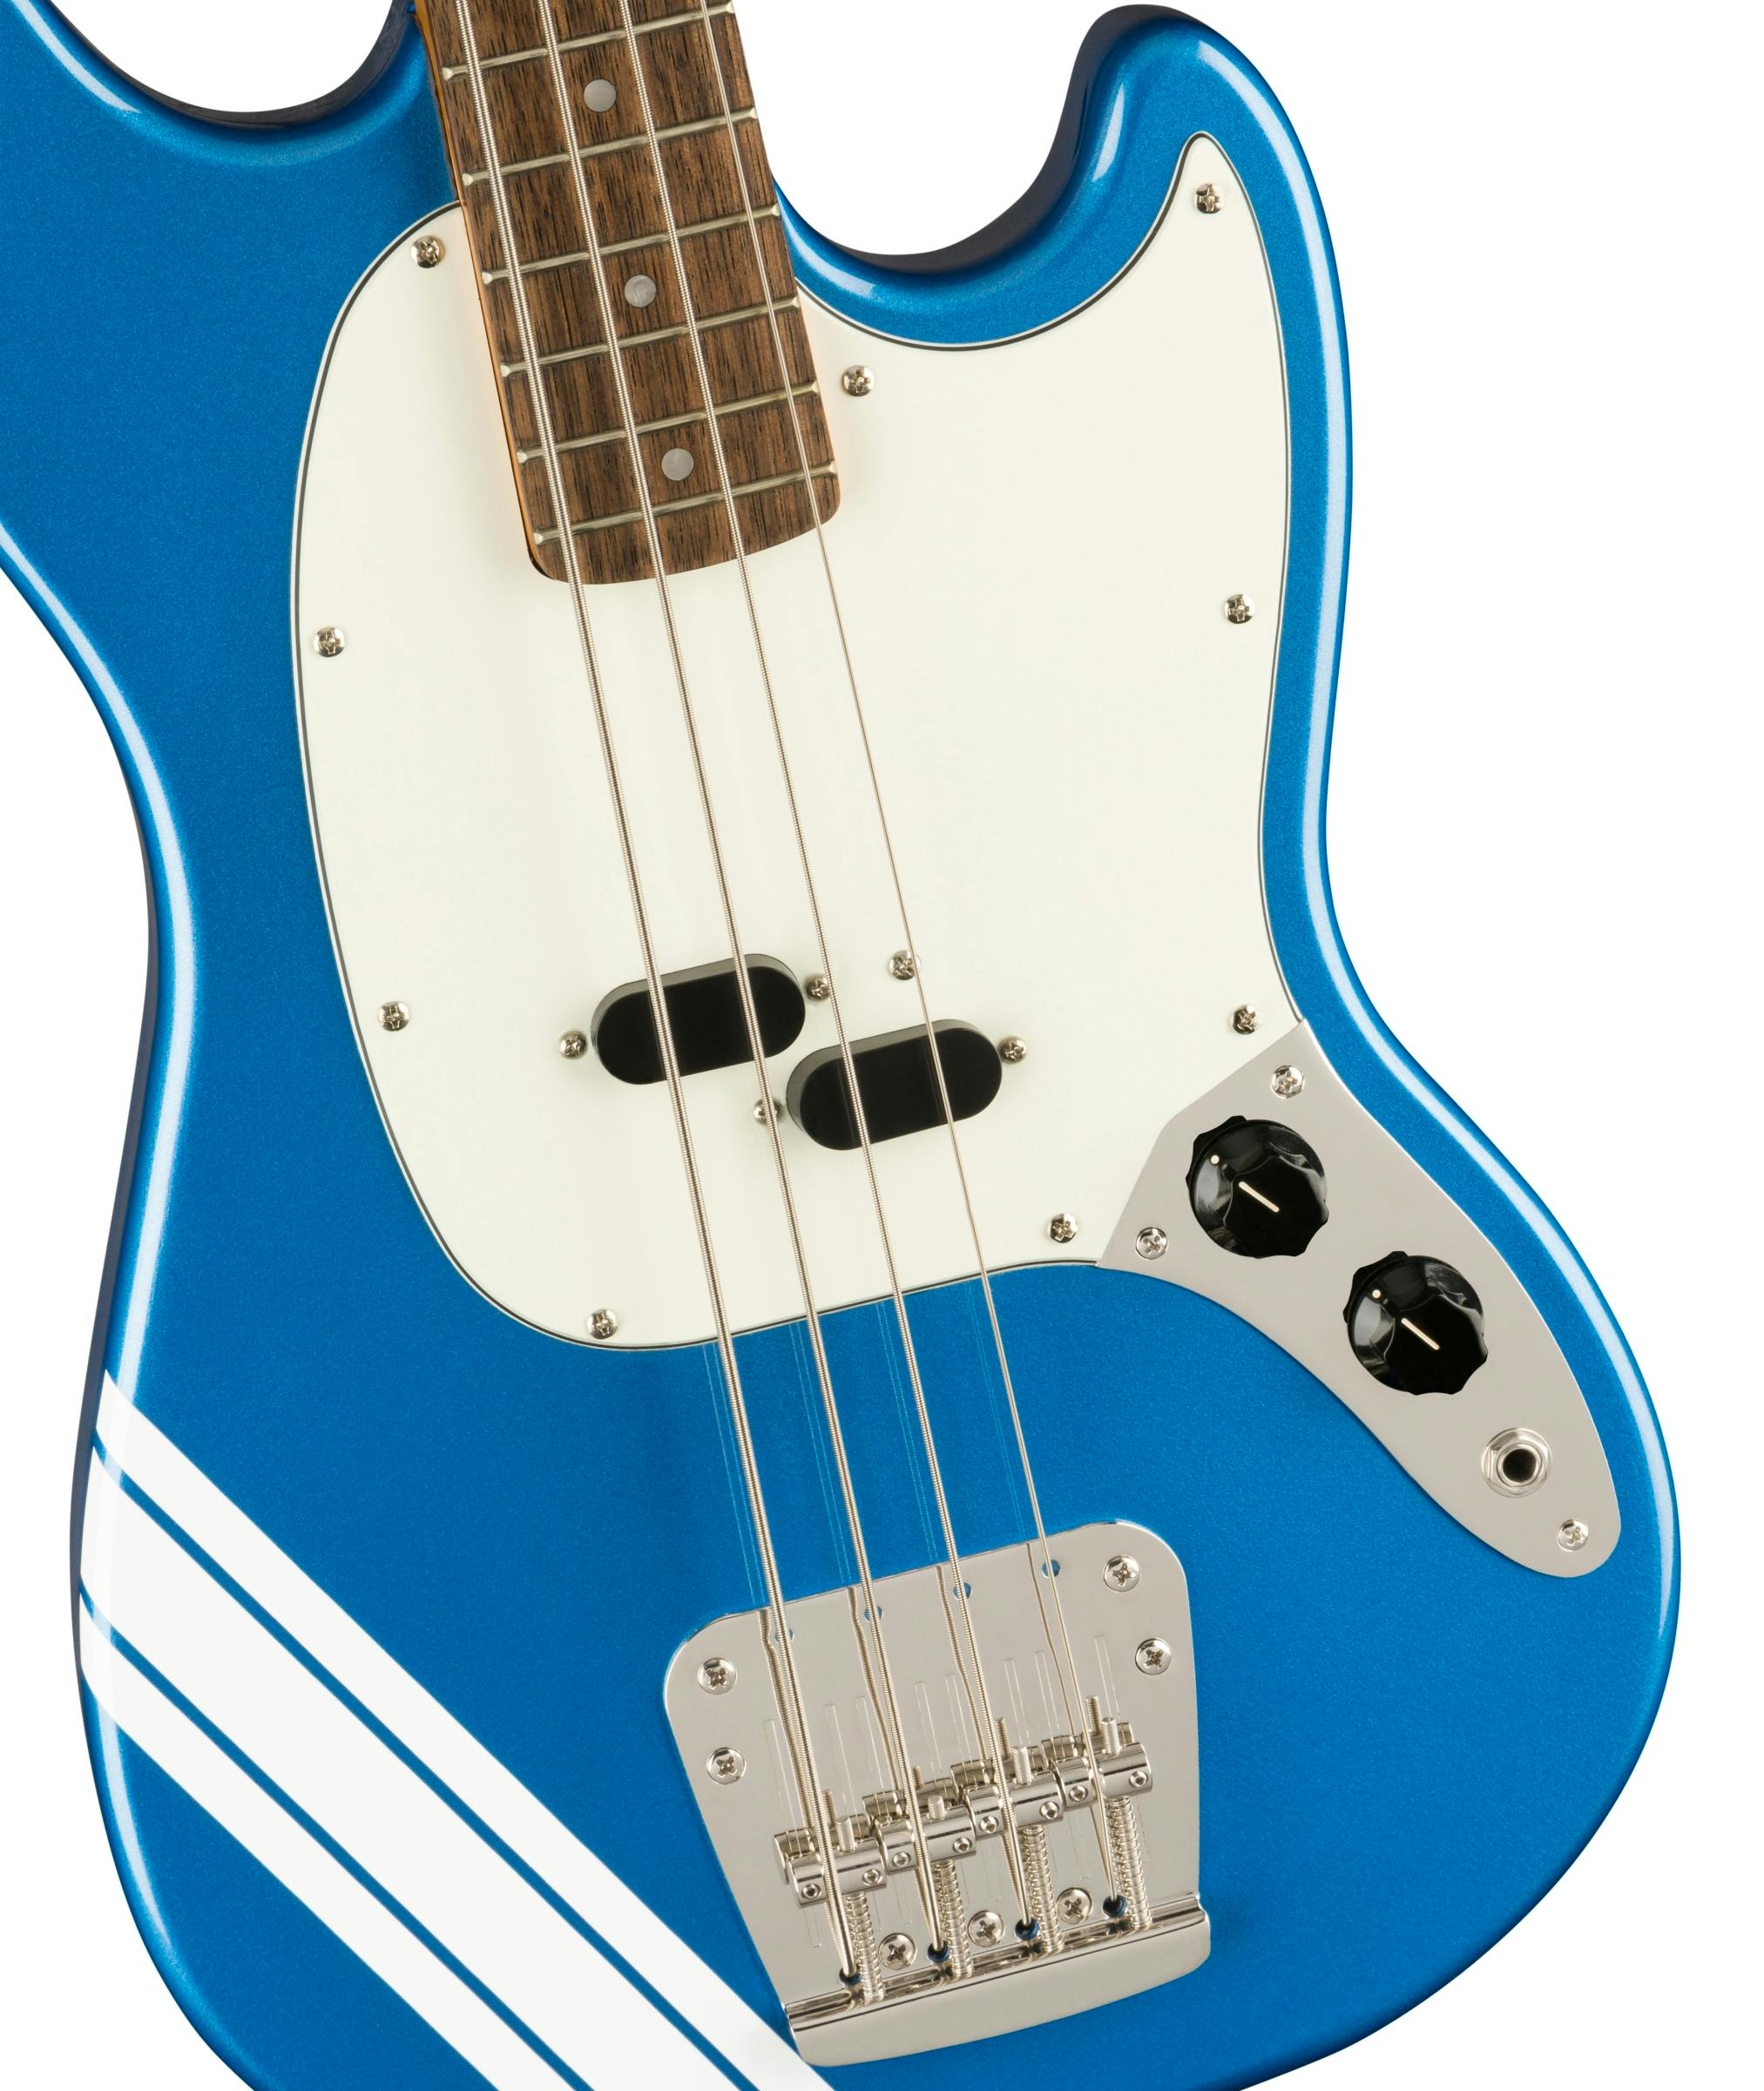 Blue bass. Squier Mustang Classic Vibe 60s. Squier FSR Classic Vibe '60s Competition Mustang®. Classic Vibe '60s Mustang. Бас-гитара Fender Squier CV late 60s Jazz Bass LRL Lake Placid Blue.